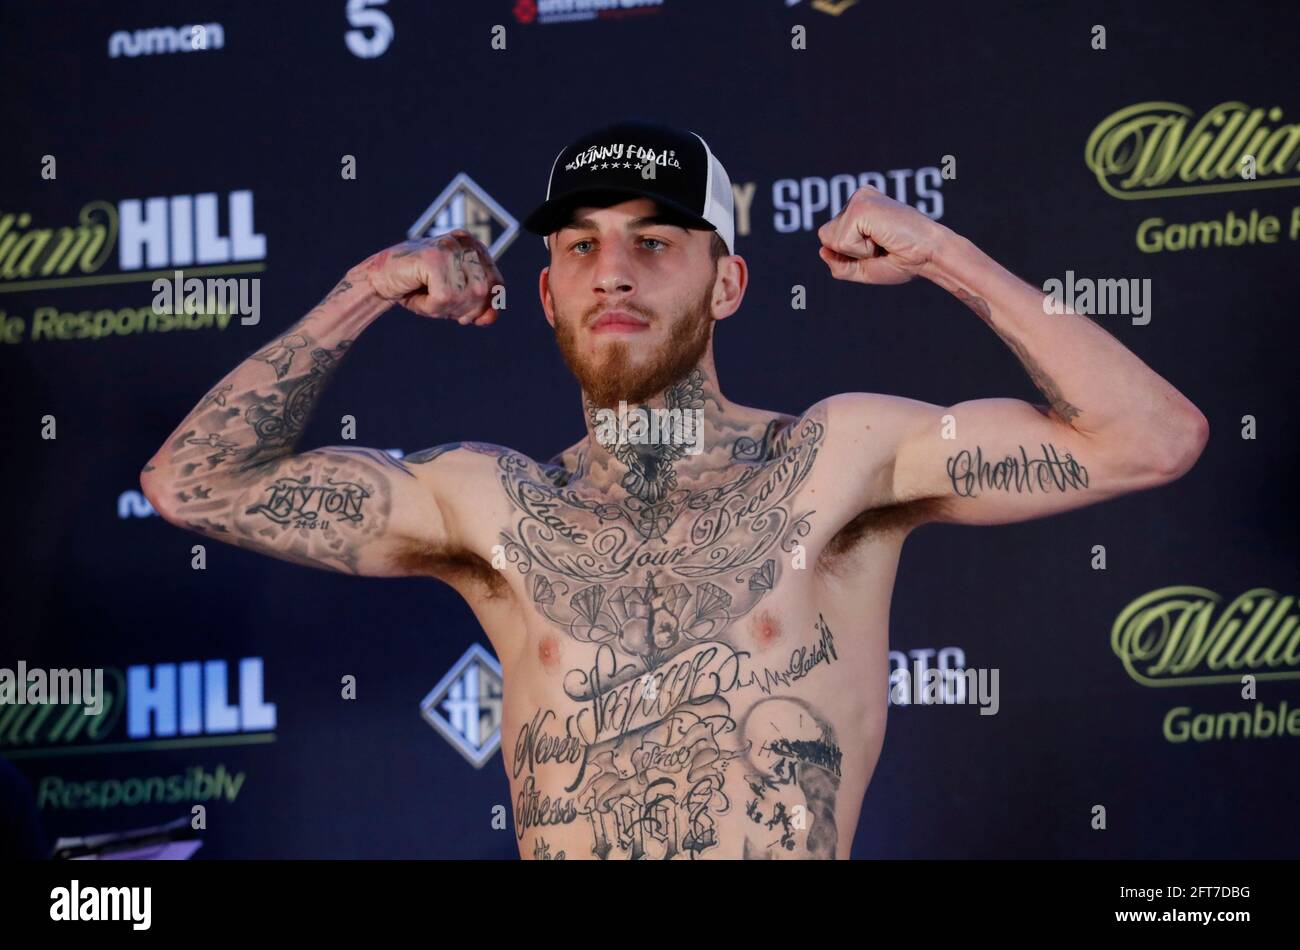 Boxe - Sam Eggington & Carlos Molina Weigh-In - The Double Tree by Hilton  Hotel, Coventry, Grande-Bretagne - 21 mai 2021 Sam Eggington pendant le  Weigh-In action Images via Reuters/Andrew Boyers Photo